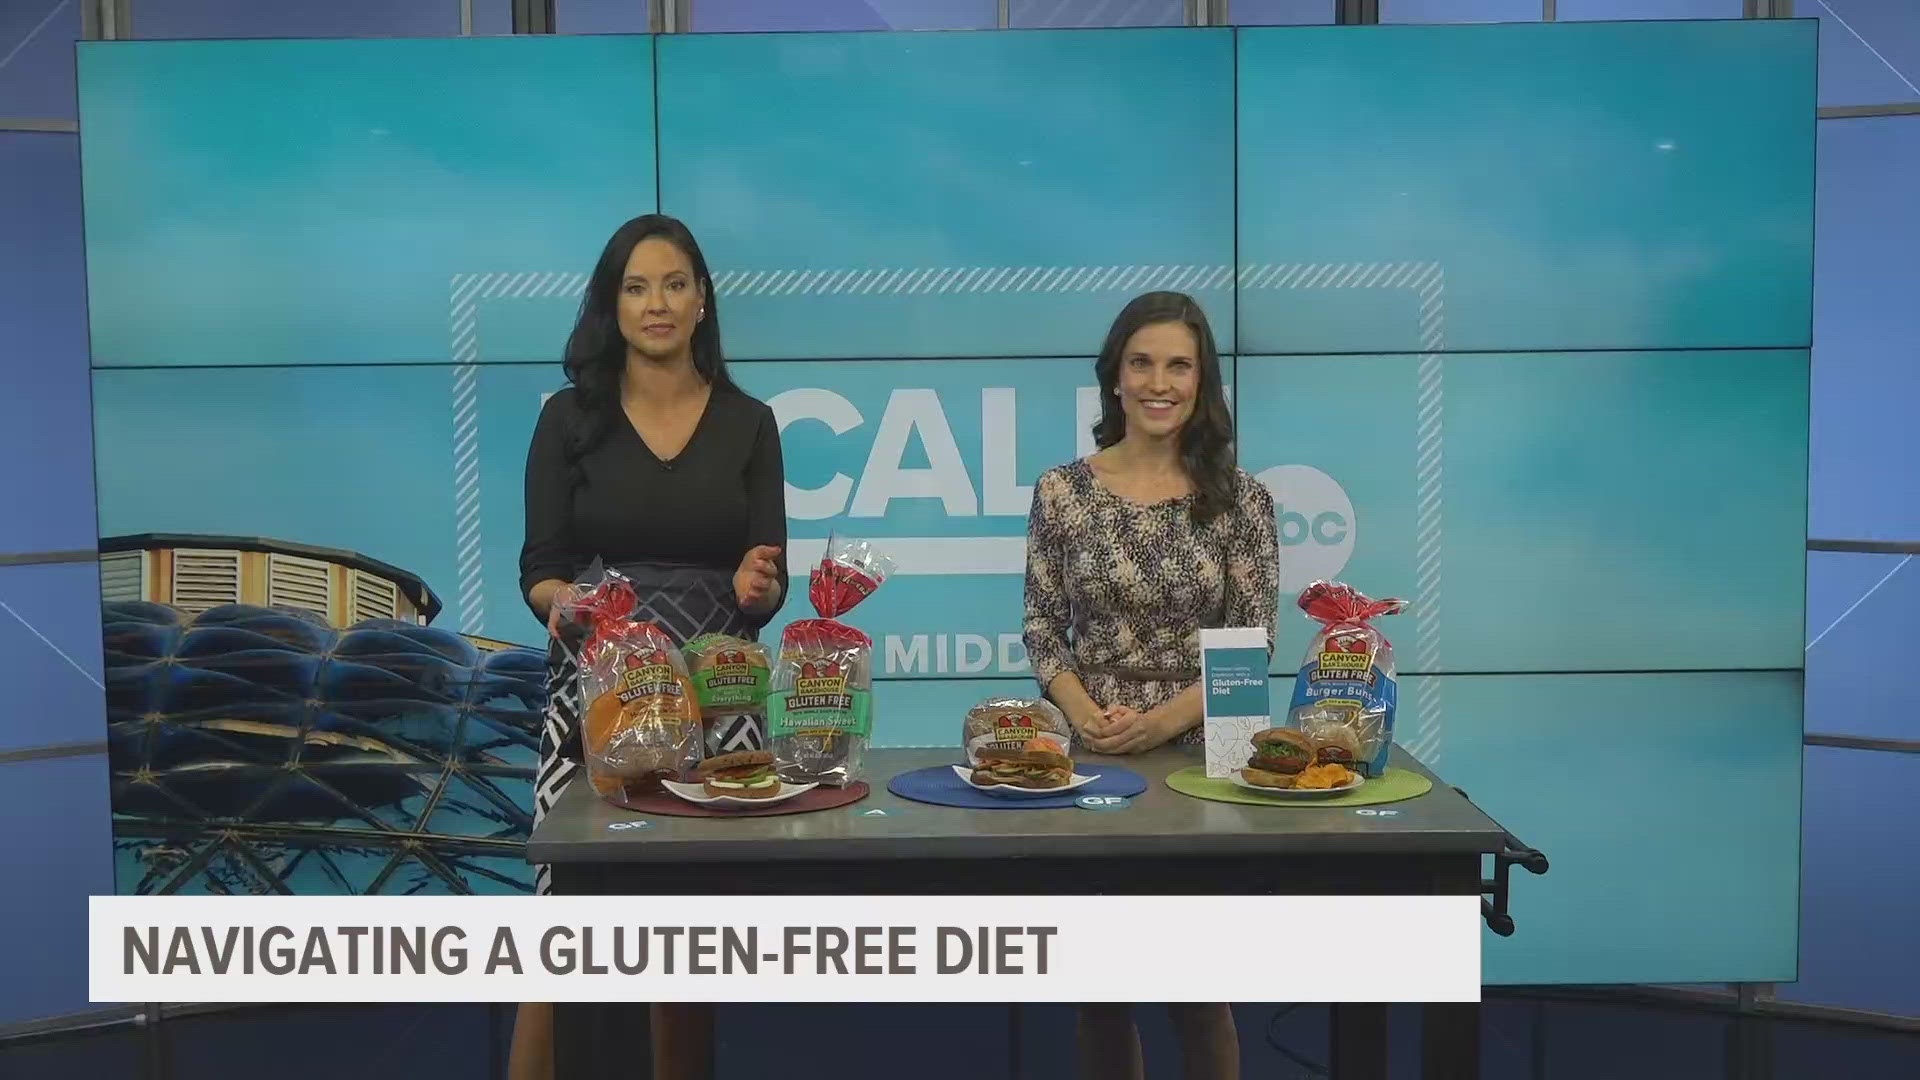 May is Celiac Disease Awareness Month. Hy-Vee dietitian Erin Good is here to share advice on navigating a gluten-free diet.